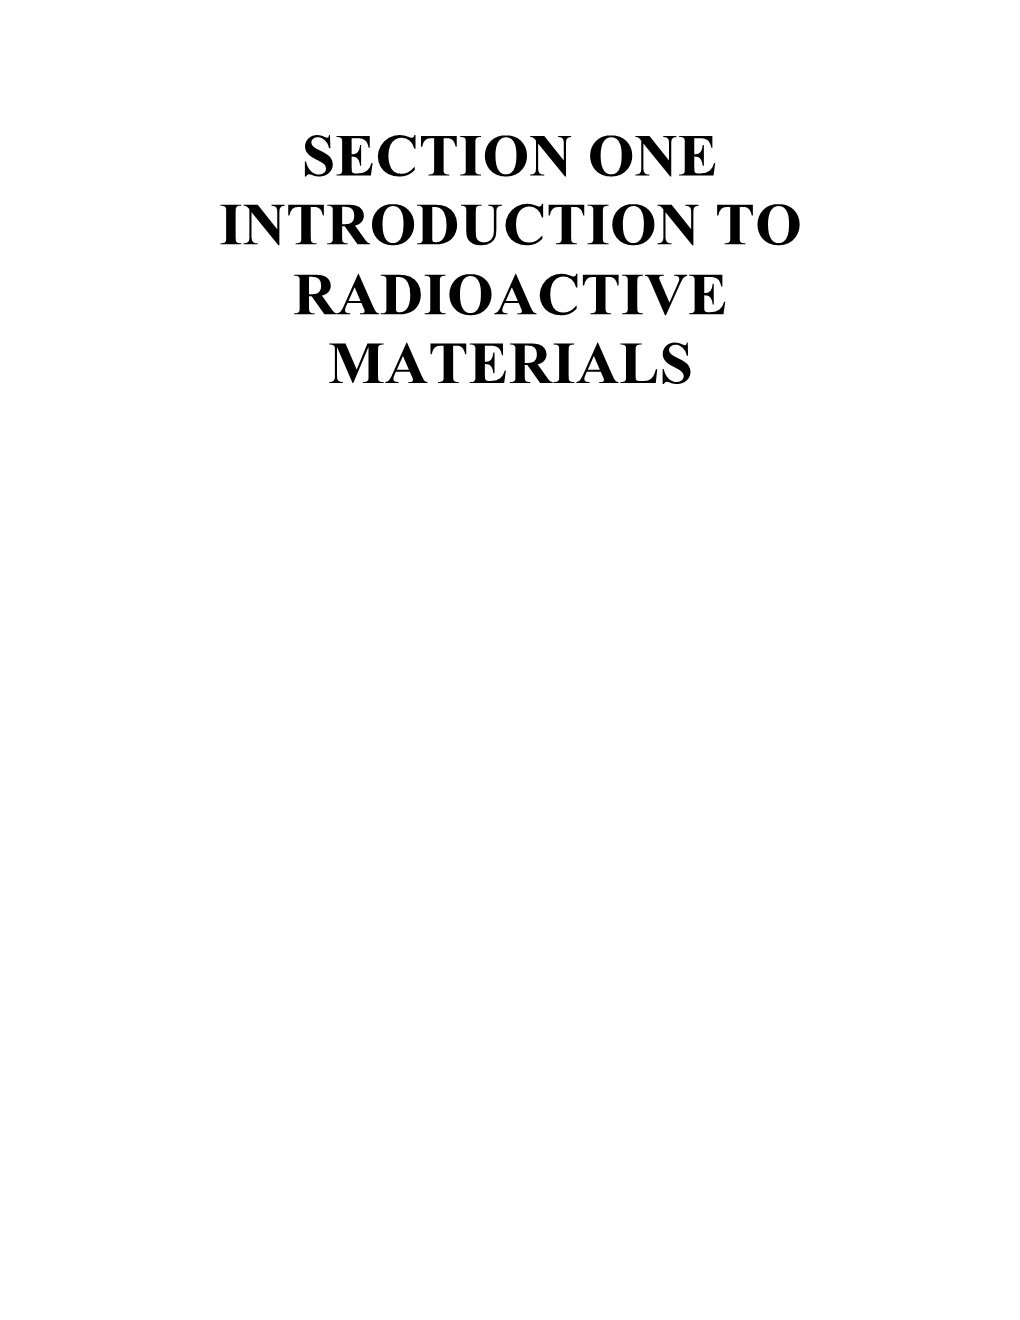 Section One Introduction to Radioactive Materials Table of Contents